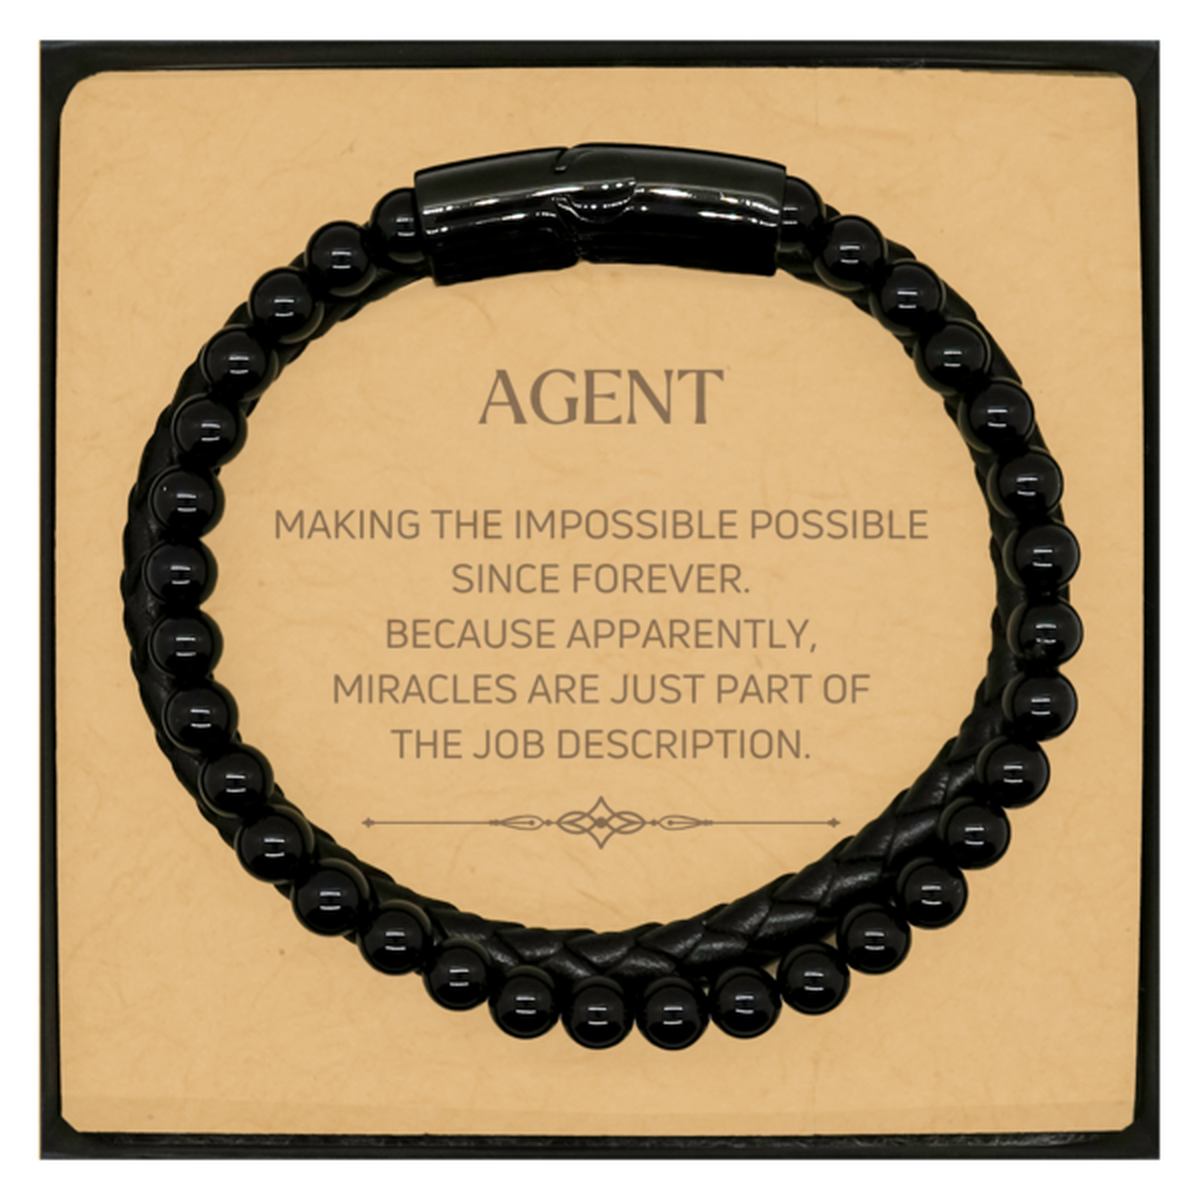 Funny Agent Gifts, Miracles are just part of the job description, Inspirational Birthday Christmas Stone Leather Bracelets For Agent, Men, Women, Coworkers, Friends, Boss